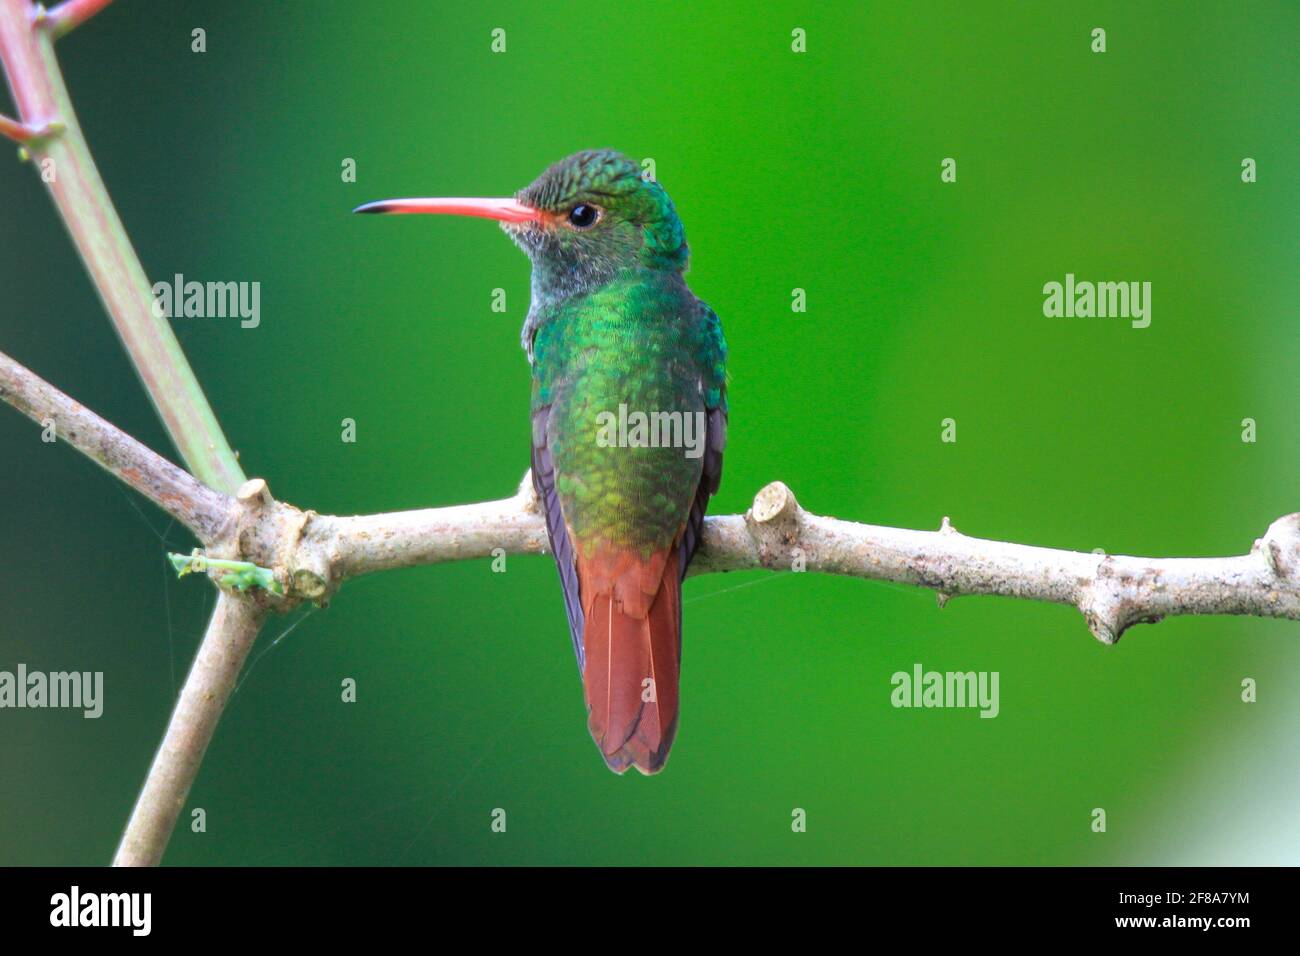 Rufous-tailed emerald hummingbird perched on a branch in Mindo, Ecuador, South America with green background Stock Photo